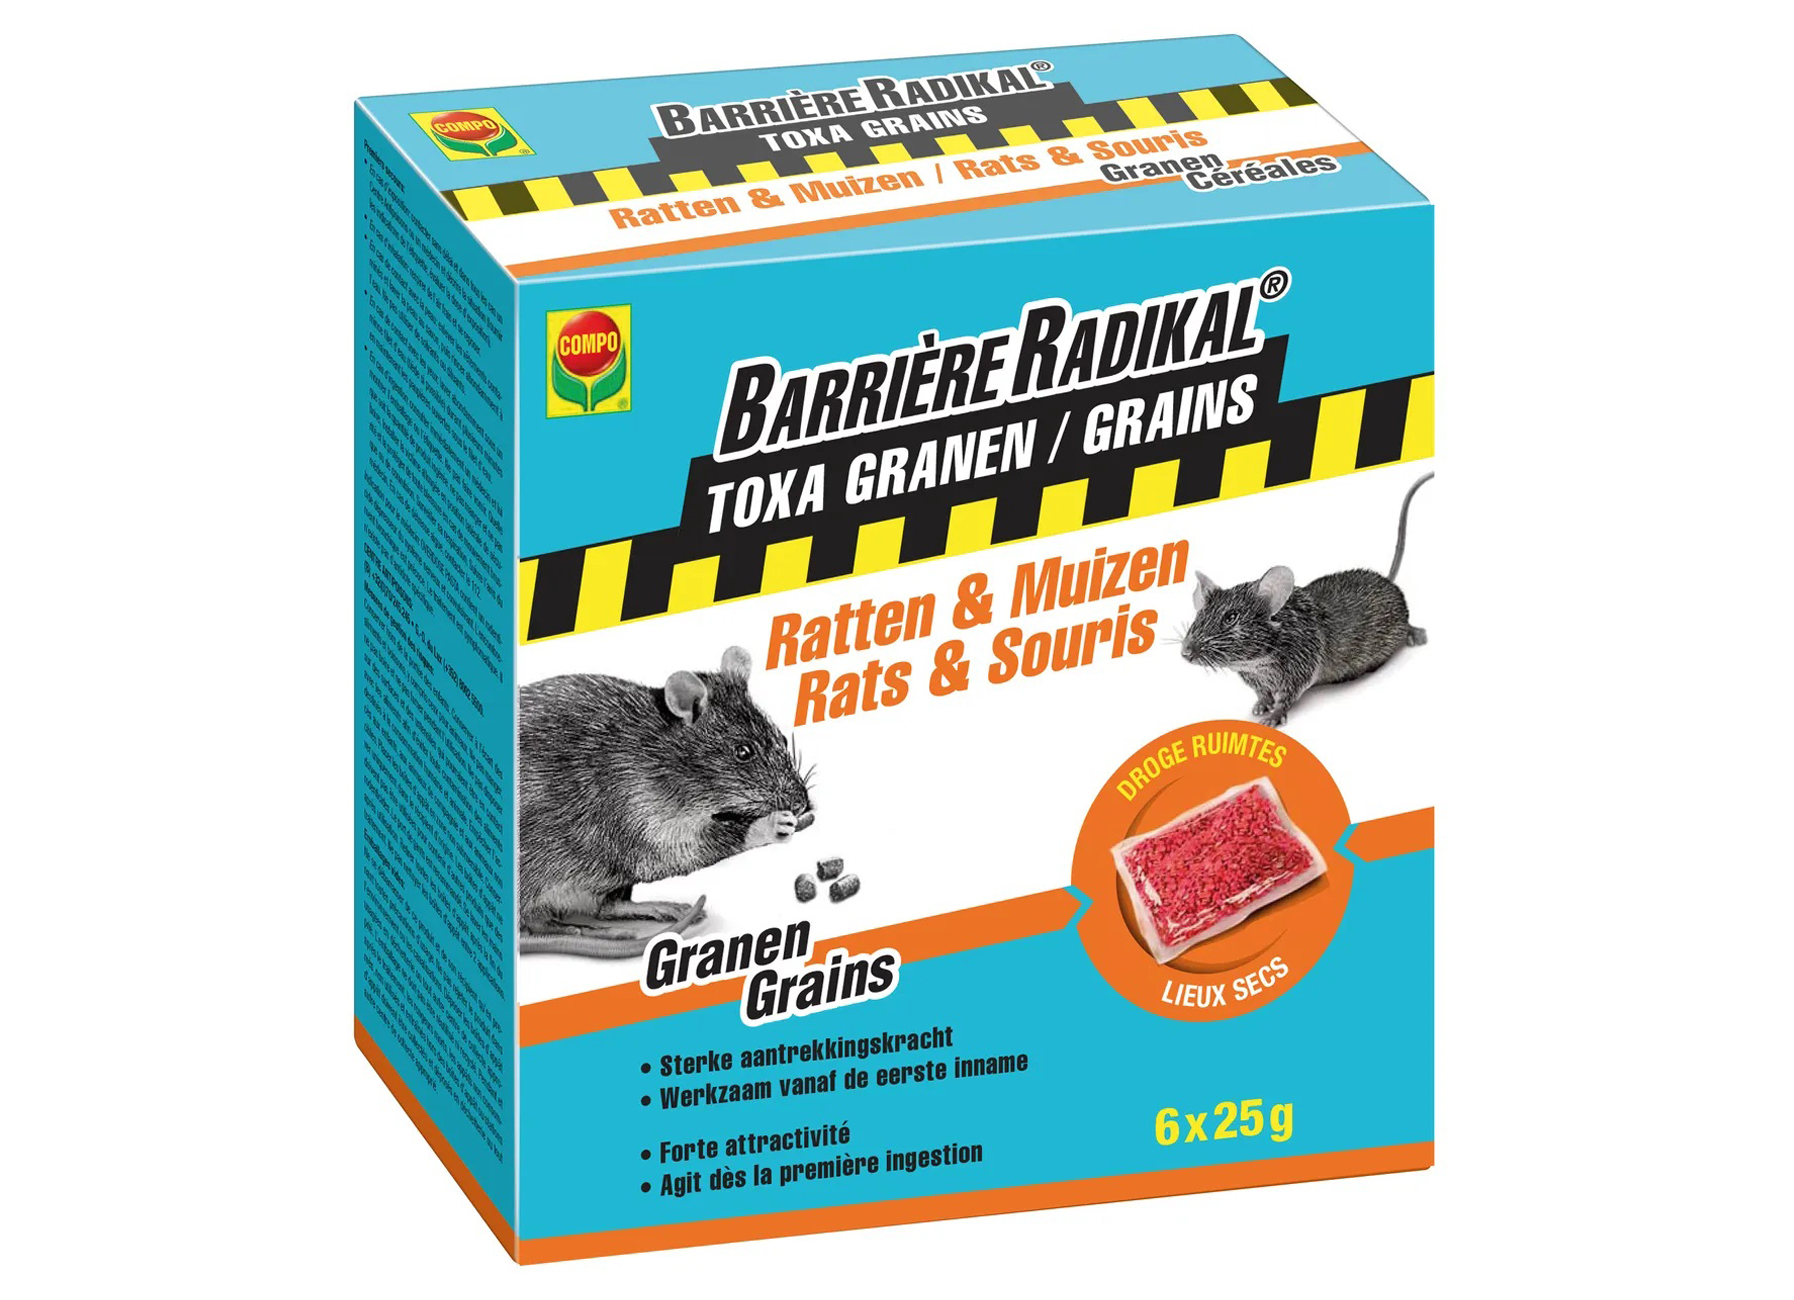 COMPO BARRIERE RADIKAL TOXA GRAINS RATS & SOURIS (6X25G)